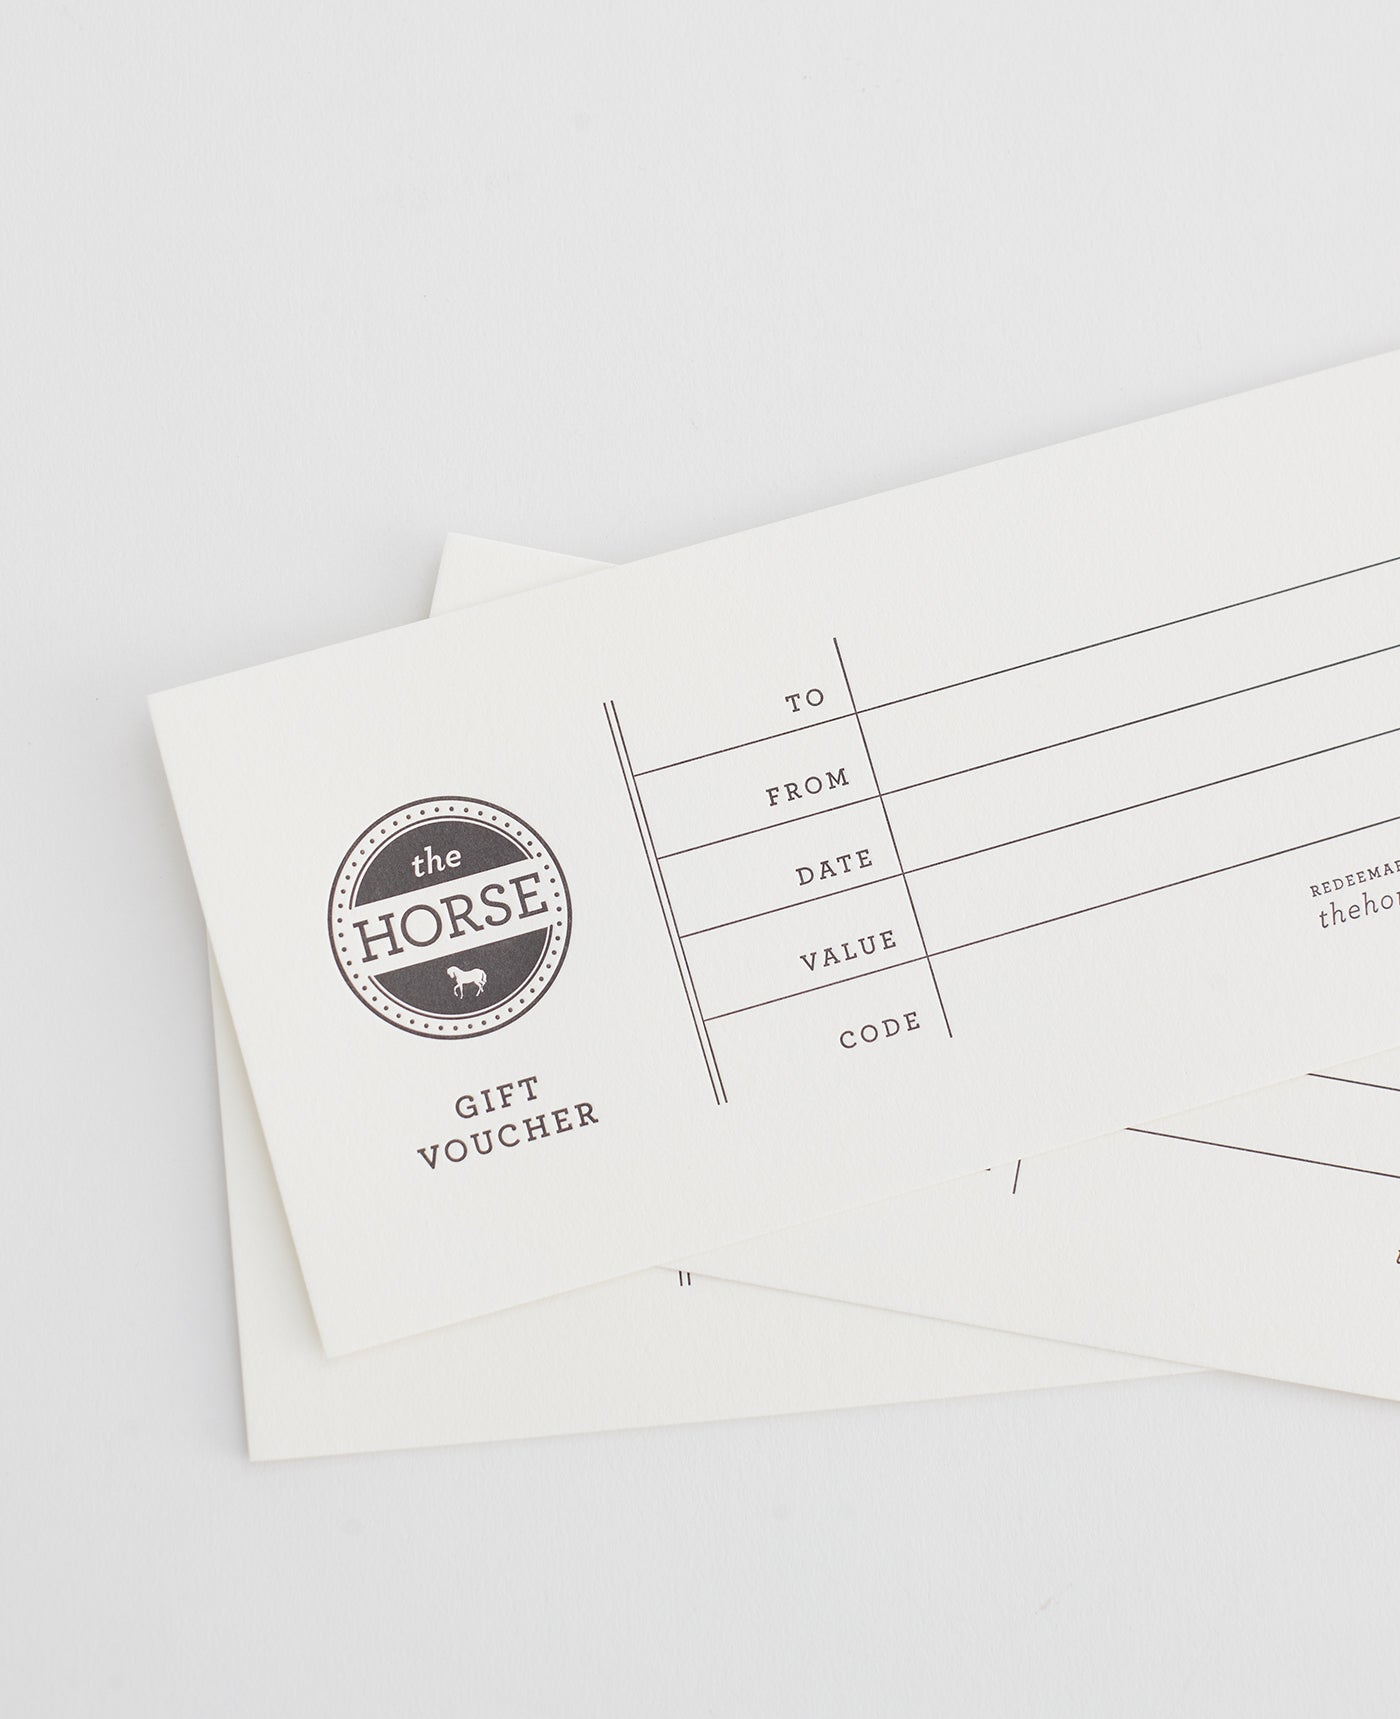 Letterpress Gift Voucher by The Horse®